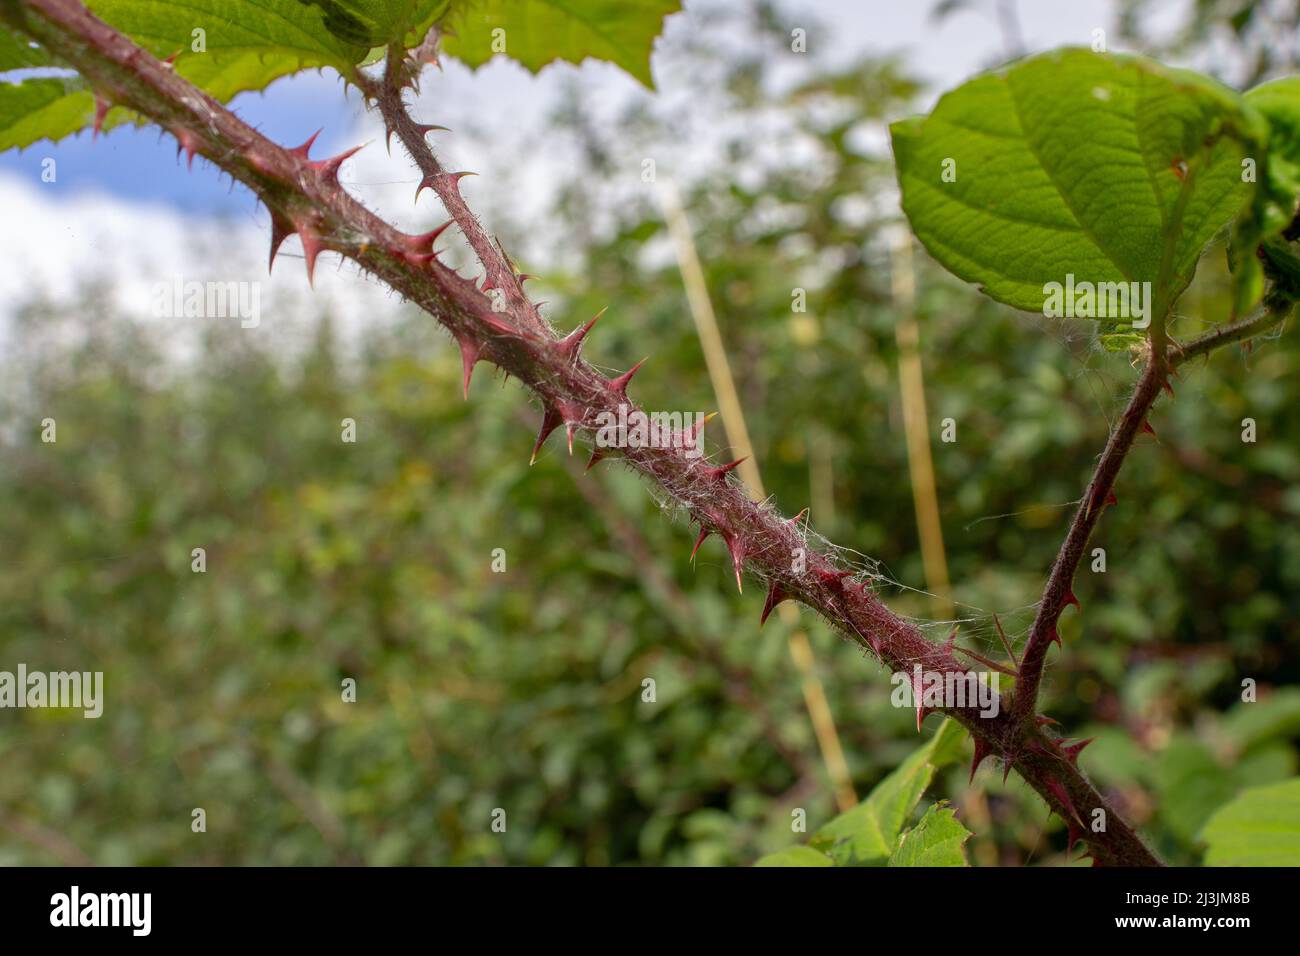 Blackberry (genus Rubus) stem with thorns isolated on a natural green hedge background Stock Photo